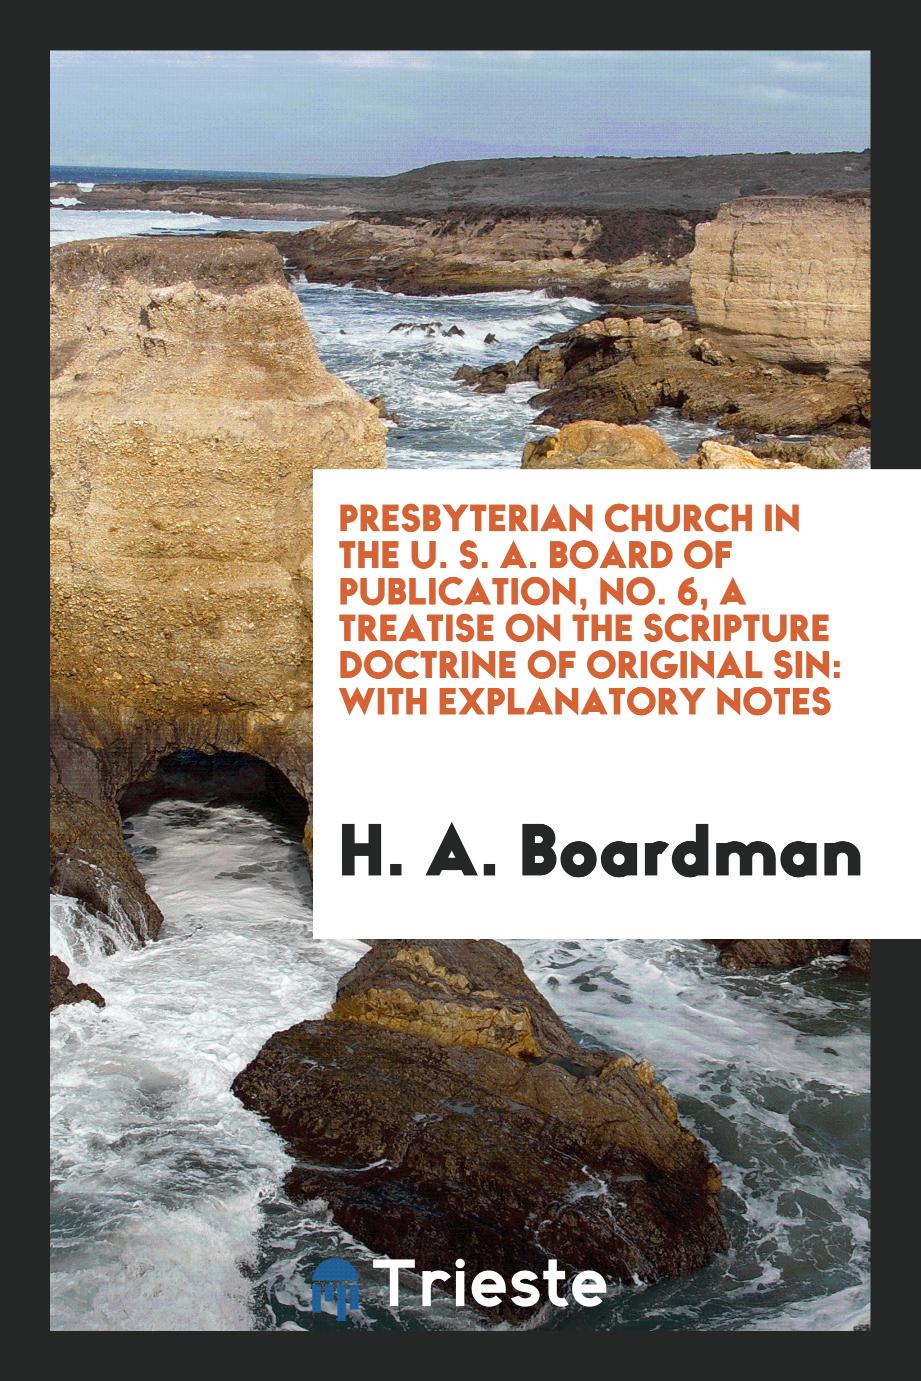 Presbyterian Church in the U. S. A. Board of Publication, No. 6, a Treatise on the Scripture Doctrine of Original Sin: With Explanatory Notes